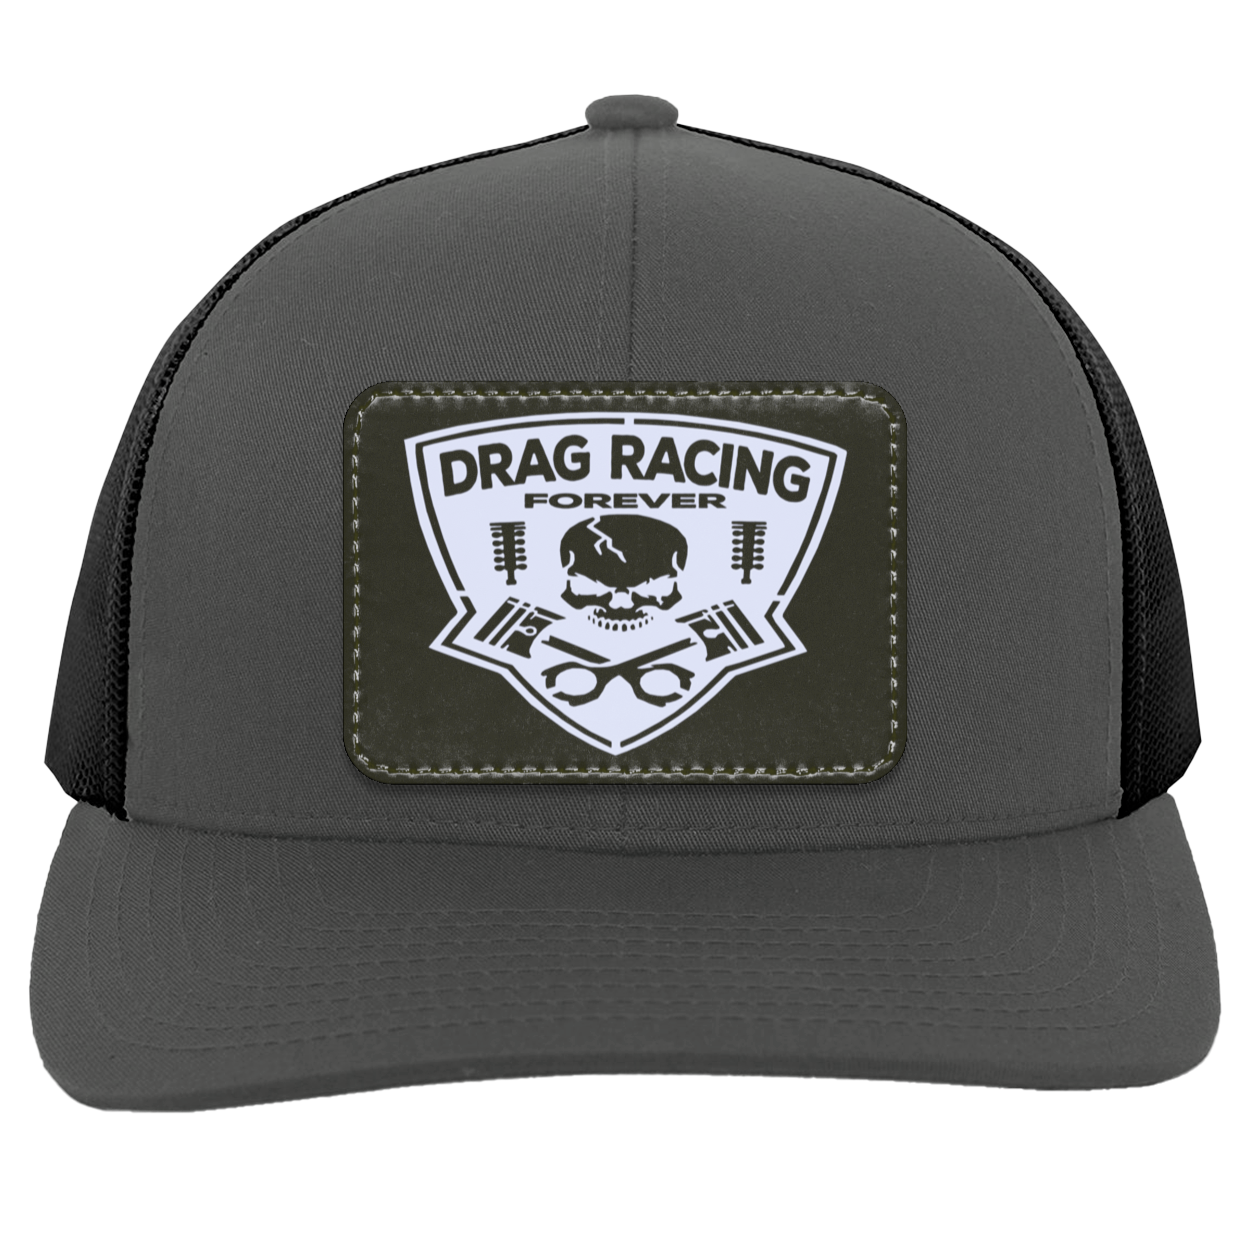 Drag Racing Forever Trucker Patched Snap Back